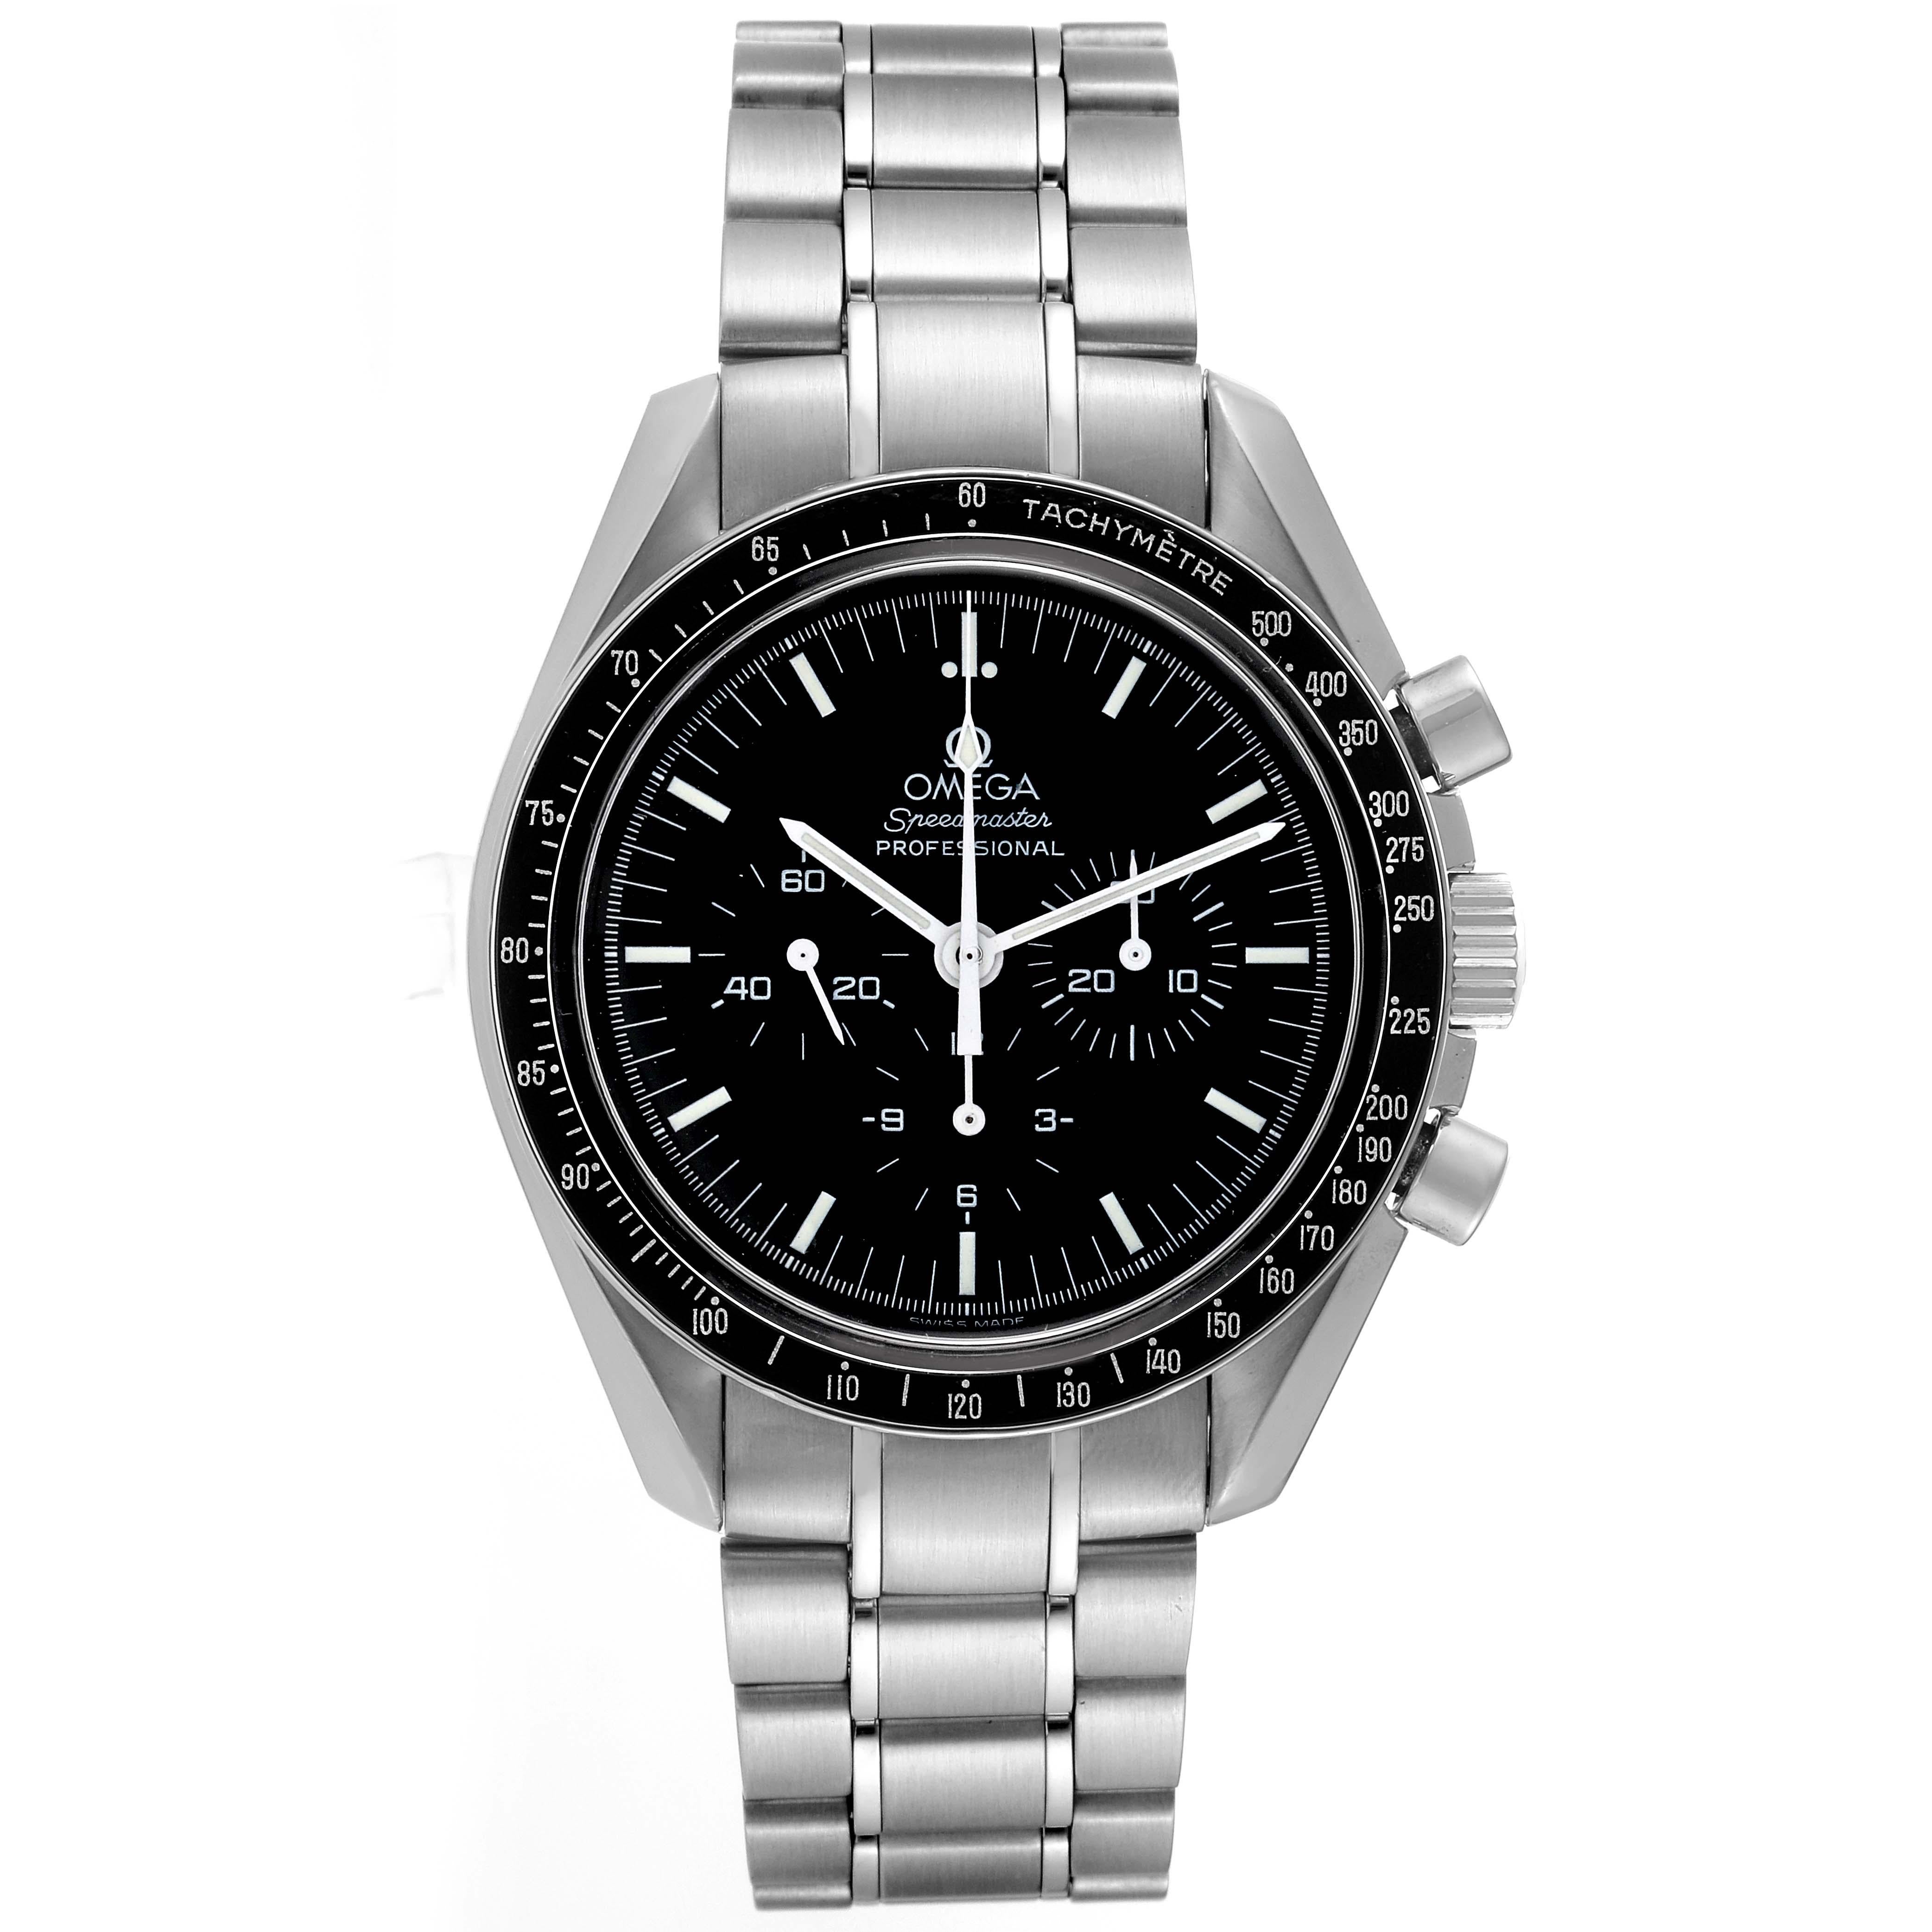 Omega Speedmaster Apollo XVII Limited Edition Mens Watch 3574.51.00 Box Card For Sale 5